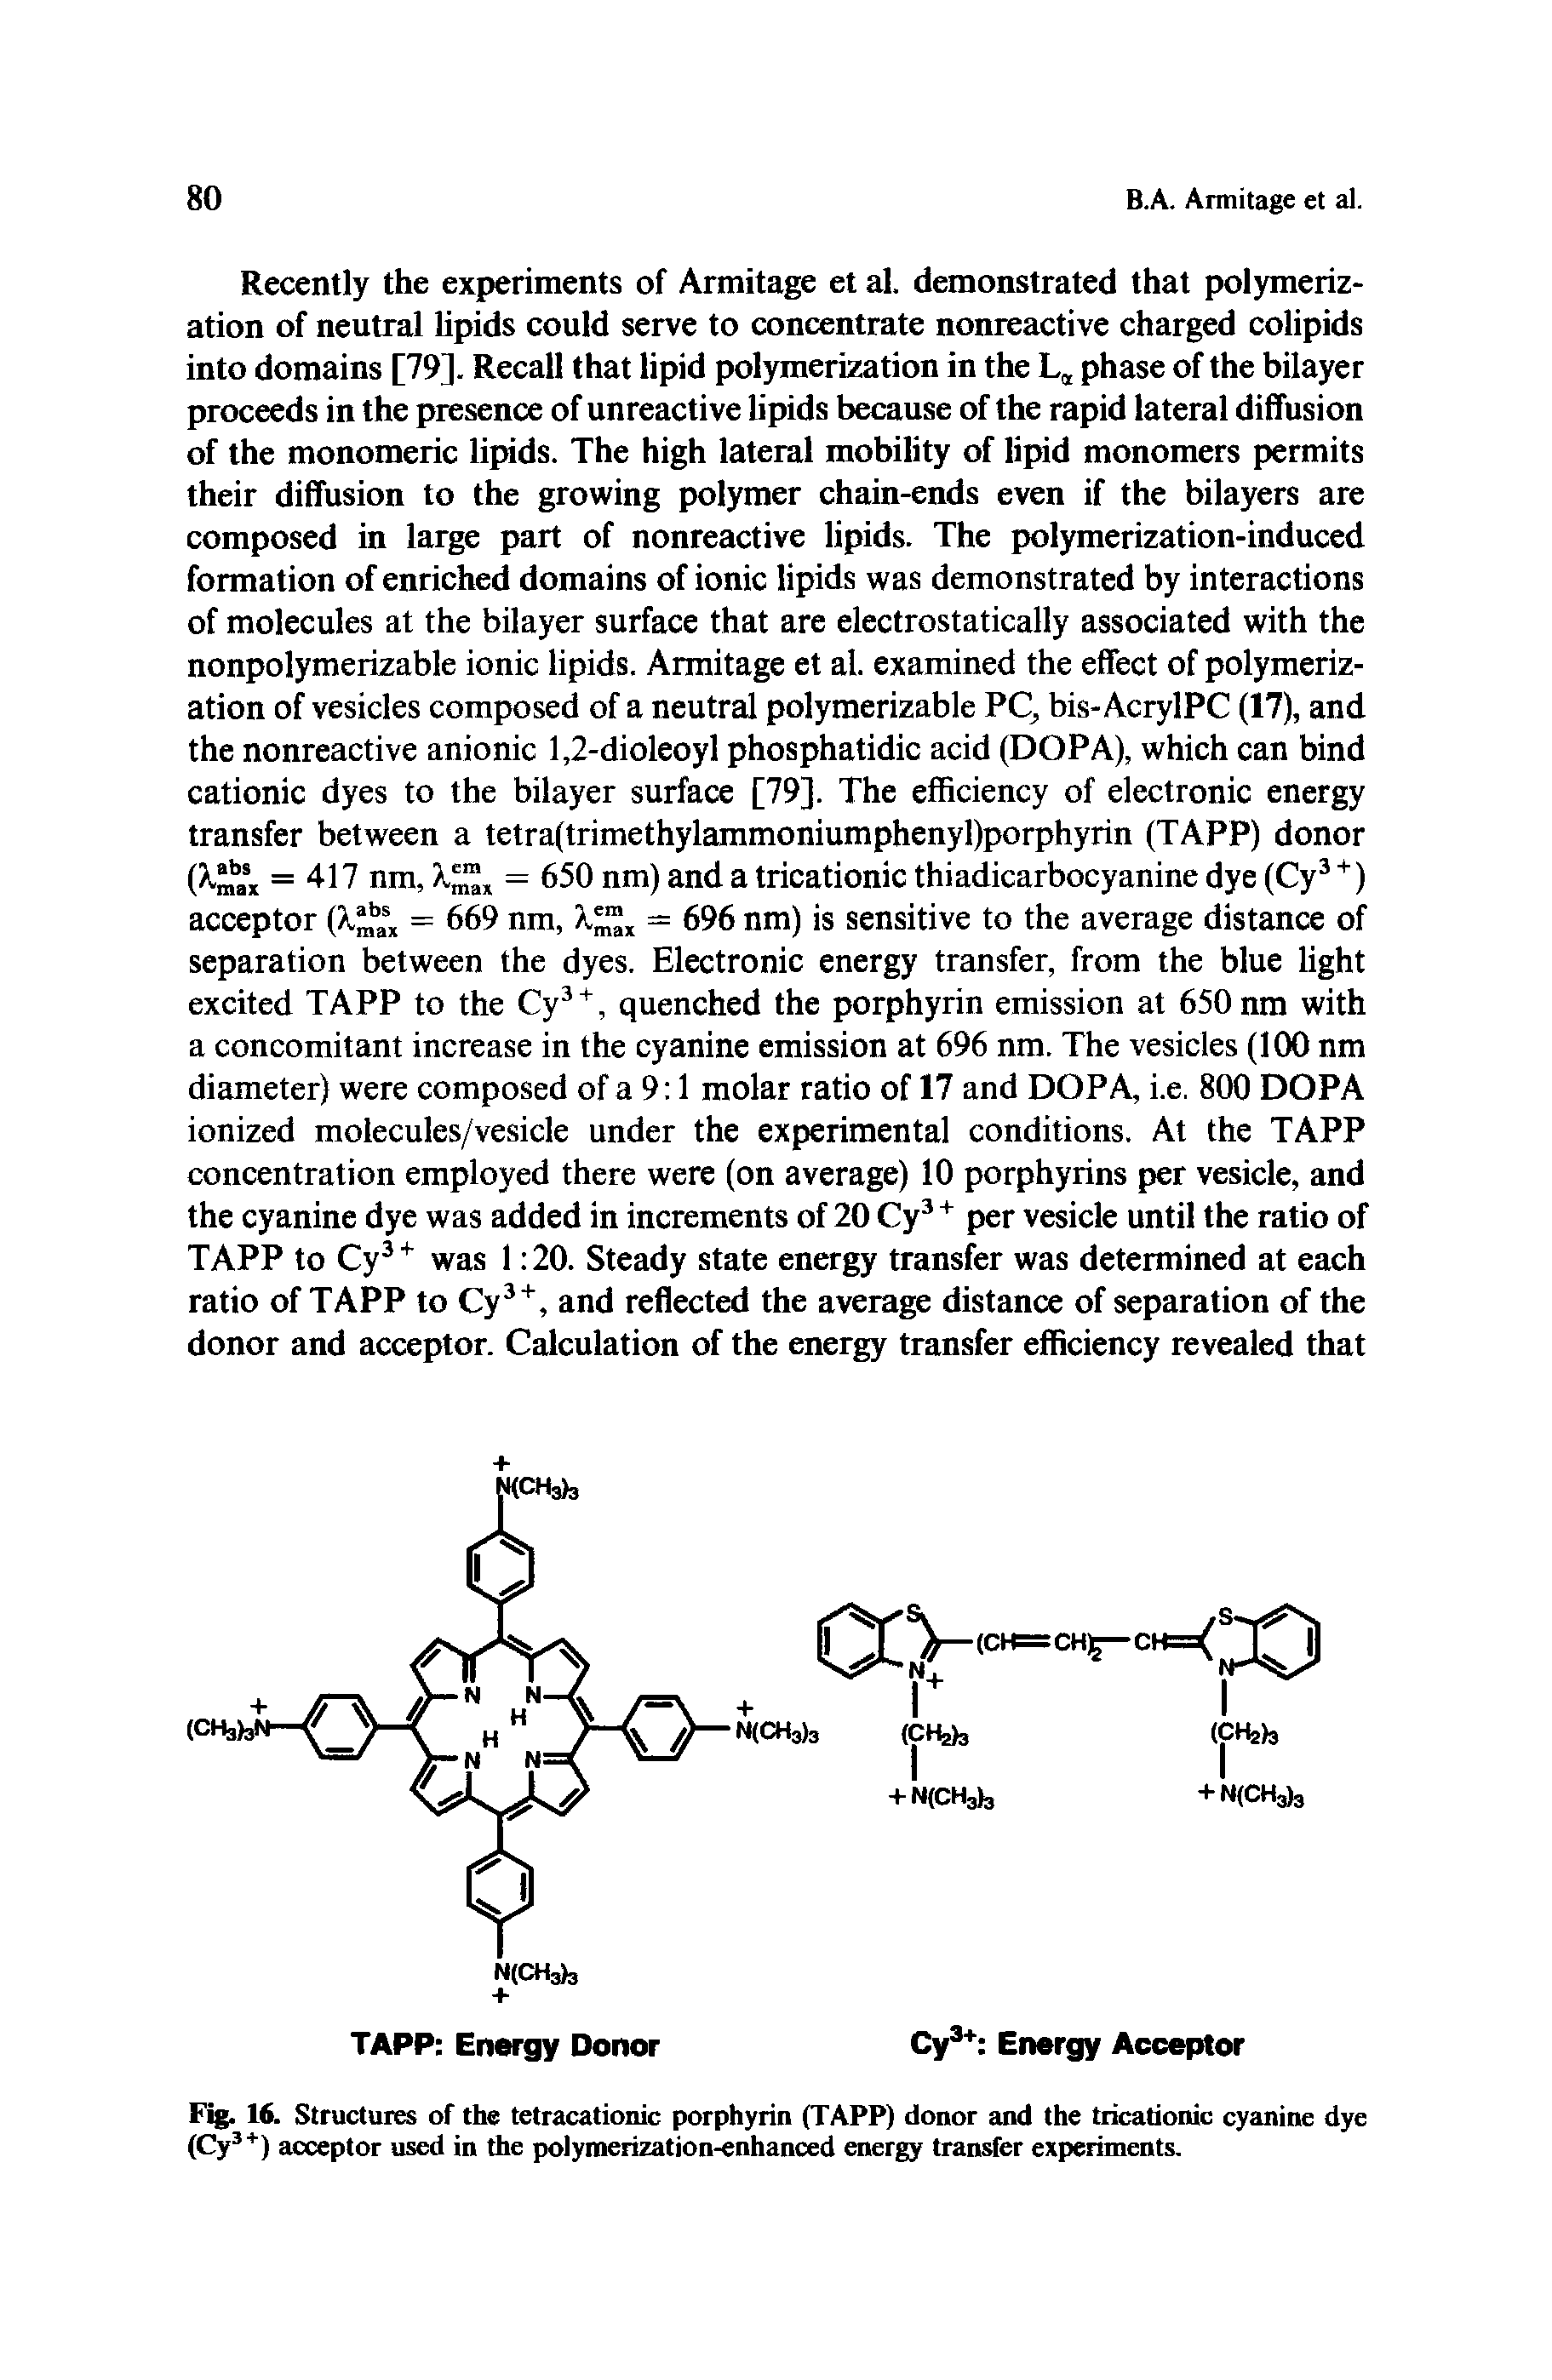 Fig. 16. Structures of the tetracationic porphyrin (TAPP) donor and the tricationic cyanine dye (Cy3+) acceptor used in the polymerization-enhanced energy transfer experiments.